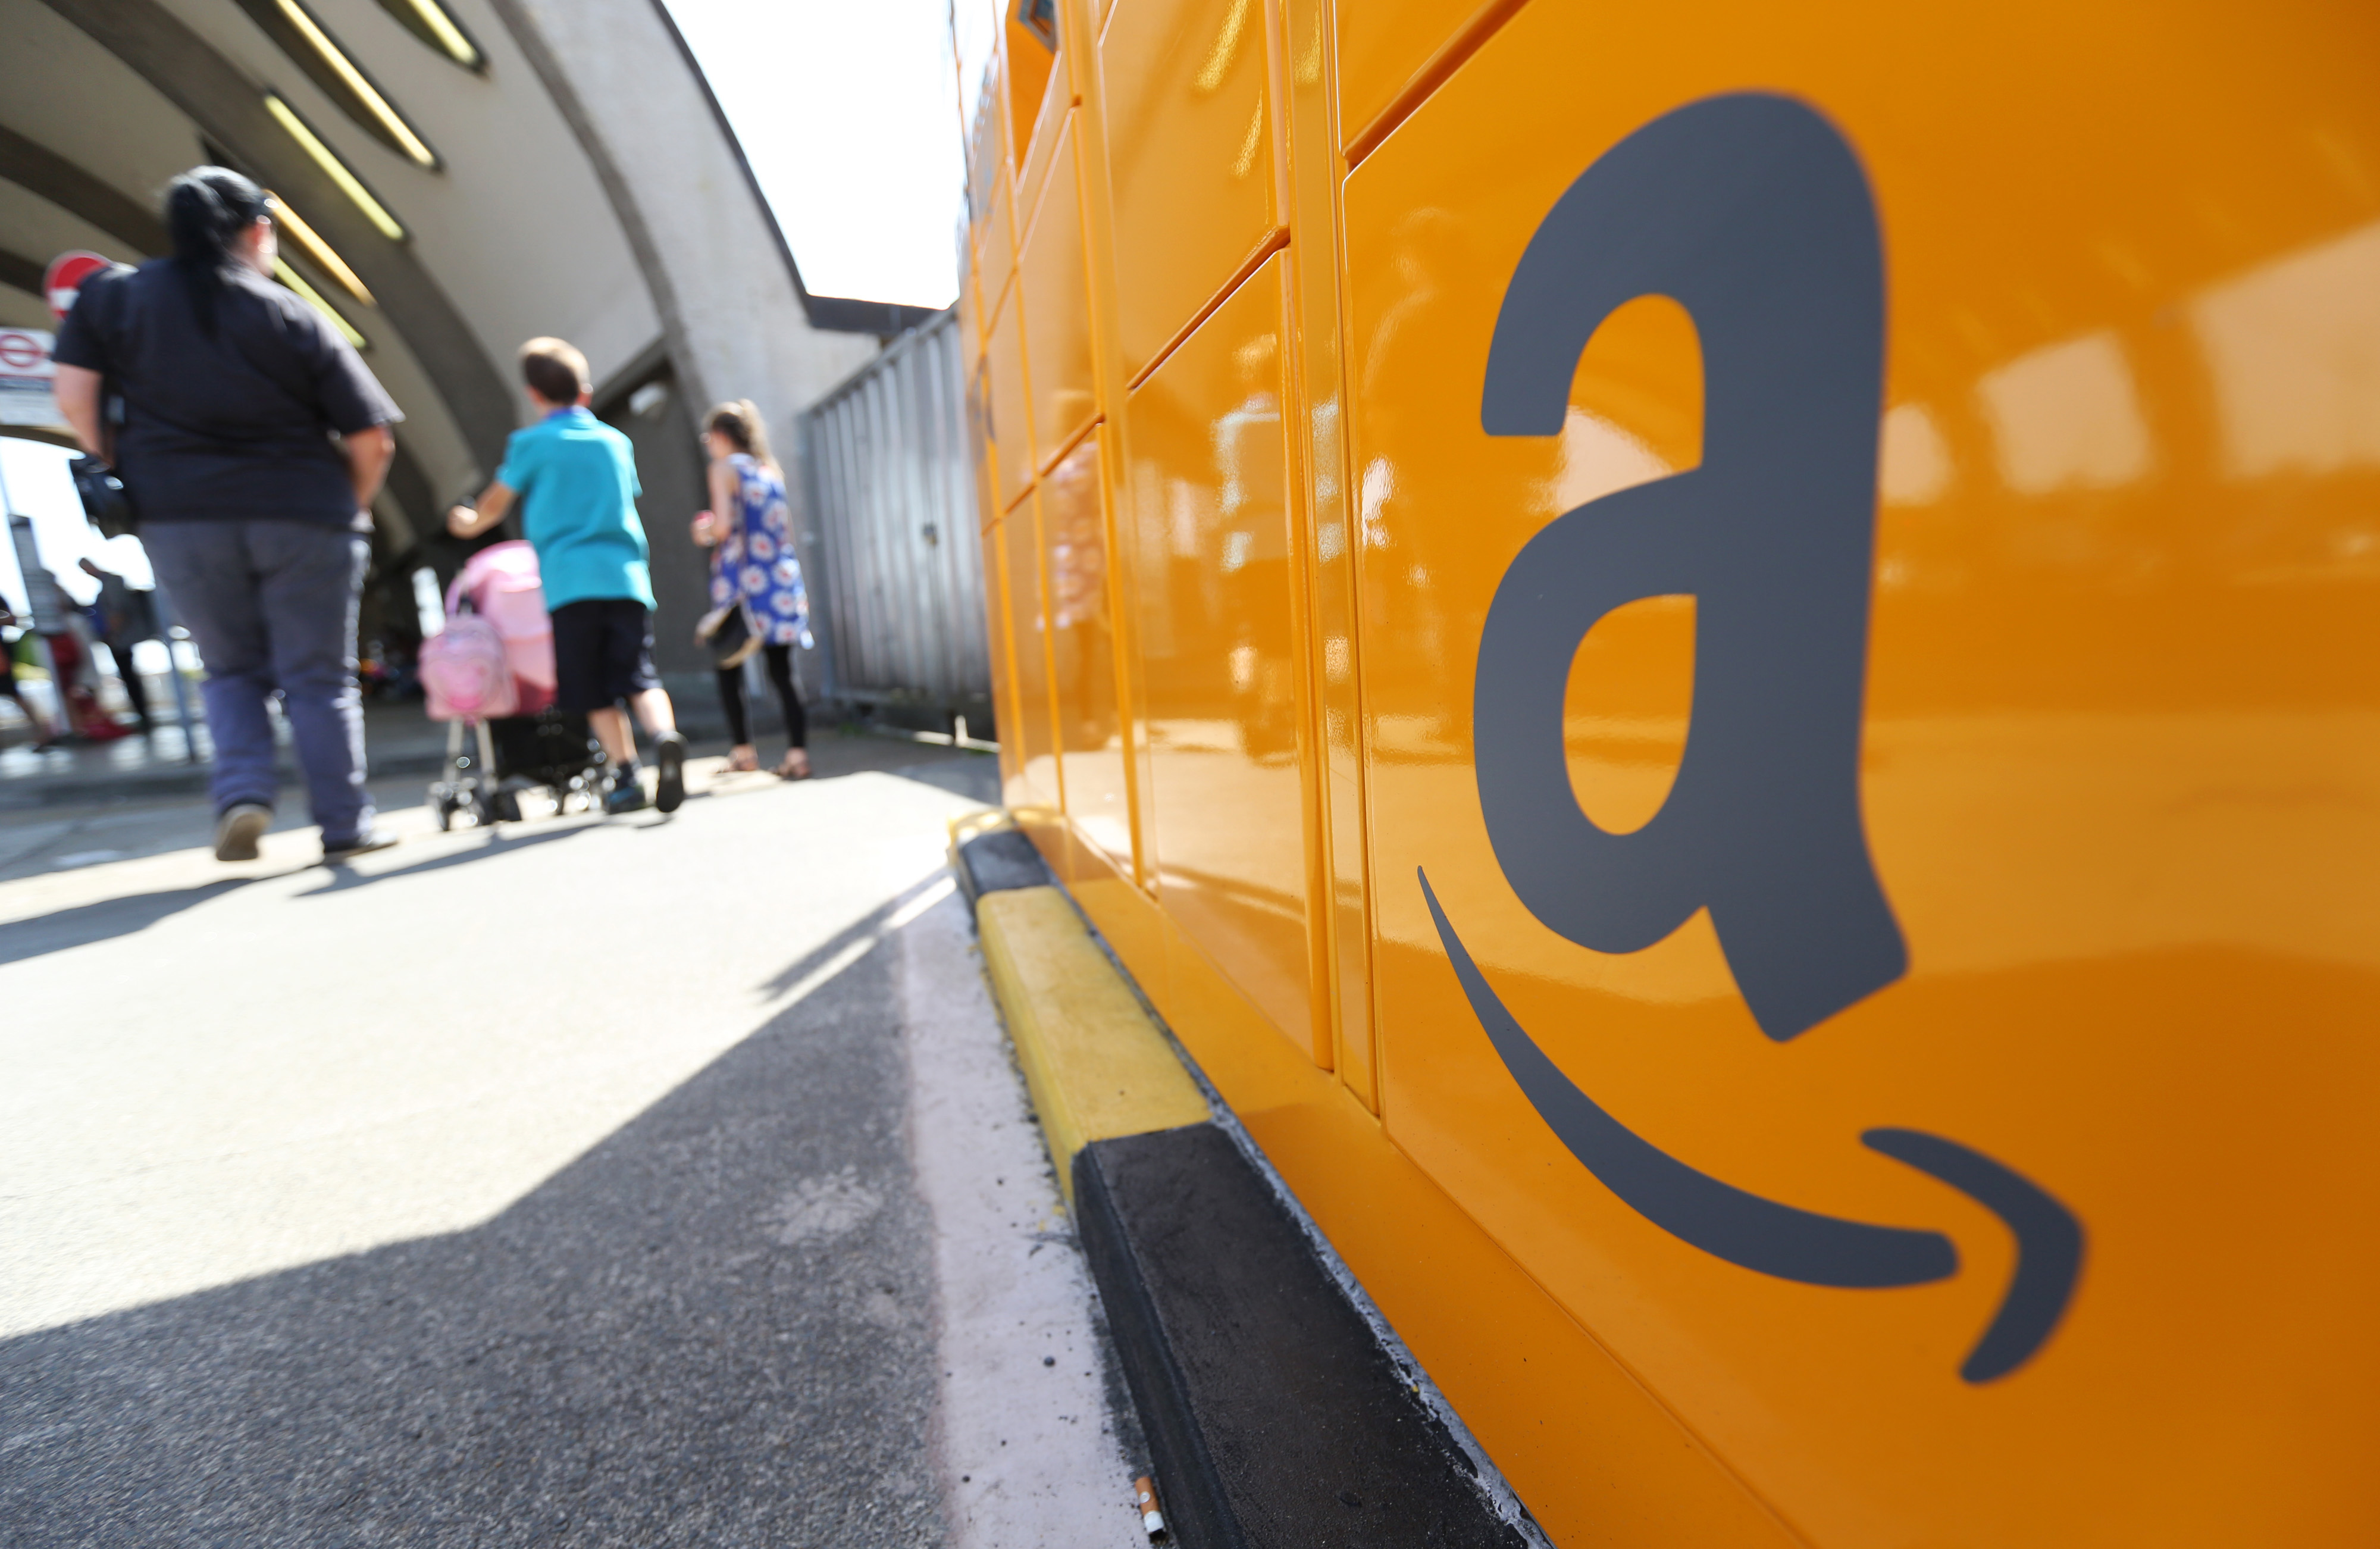 Customers Collect Online Orders From An Amazon.com Inc. Locker